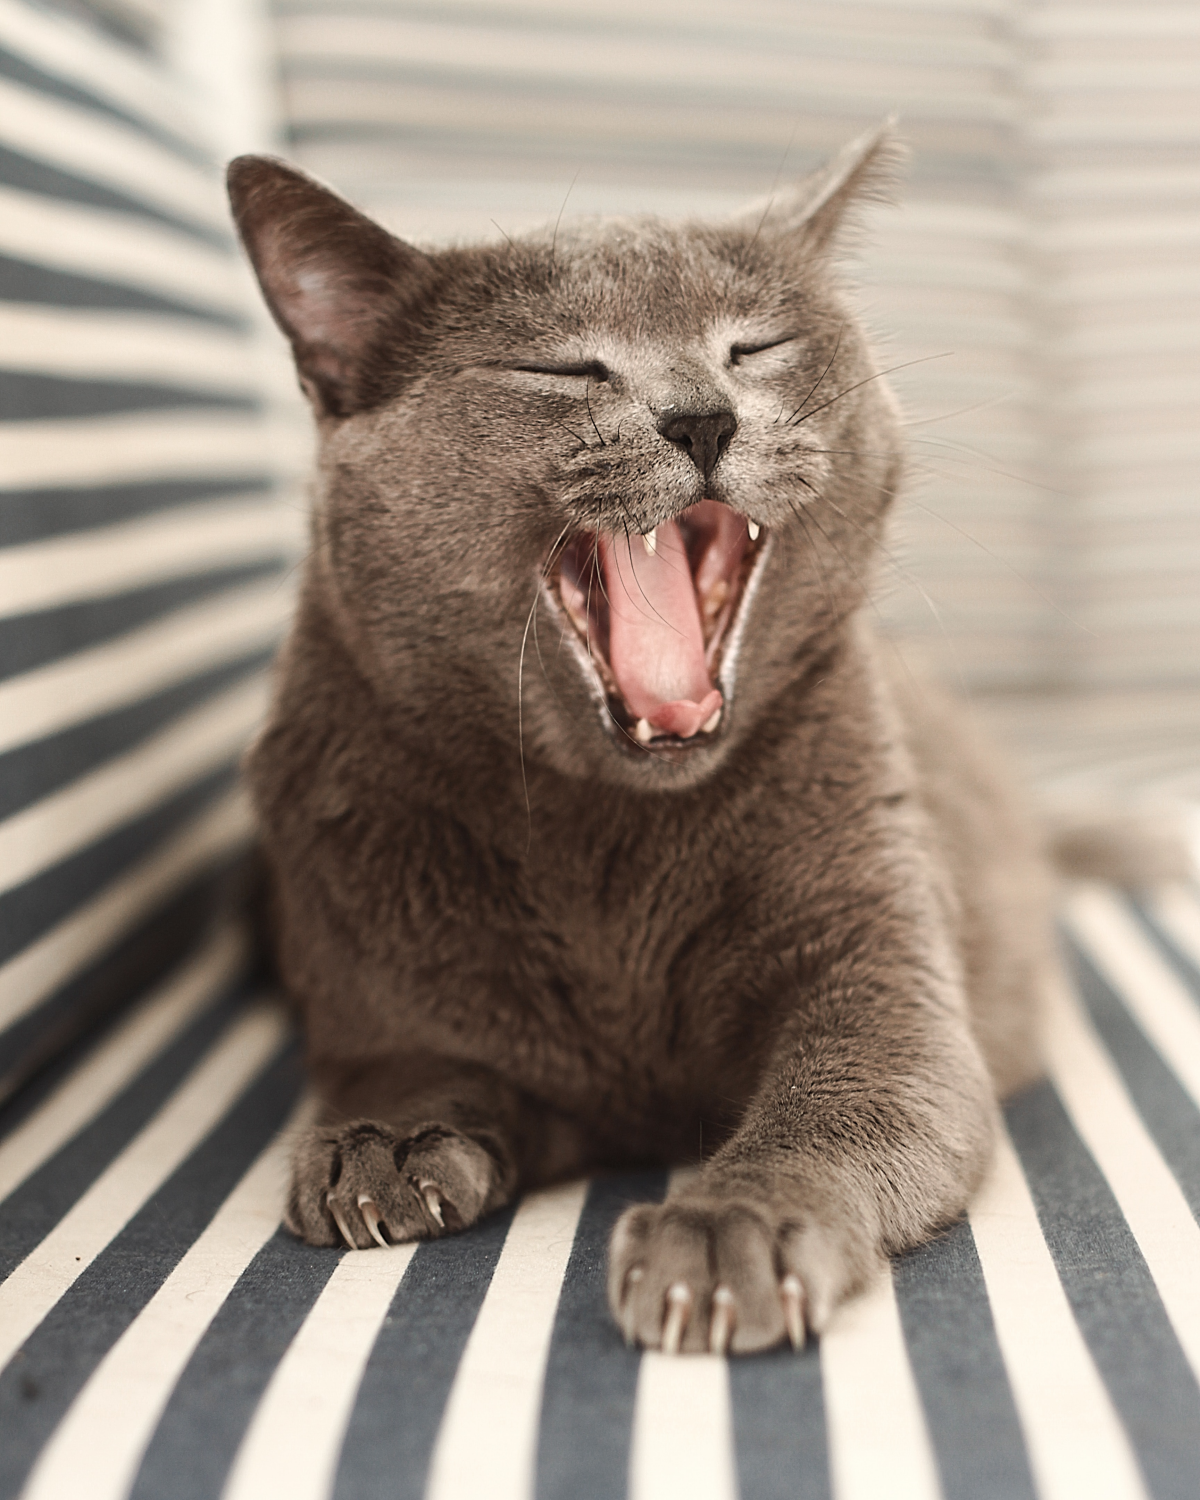 cats that dont shed russian blue cat yawning